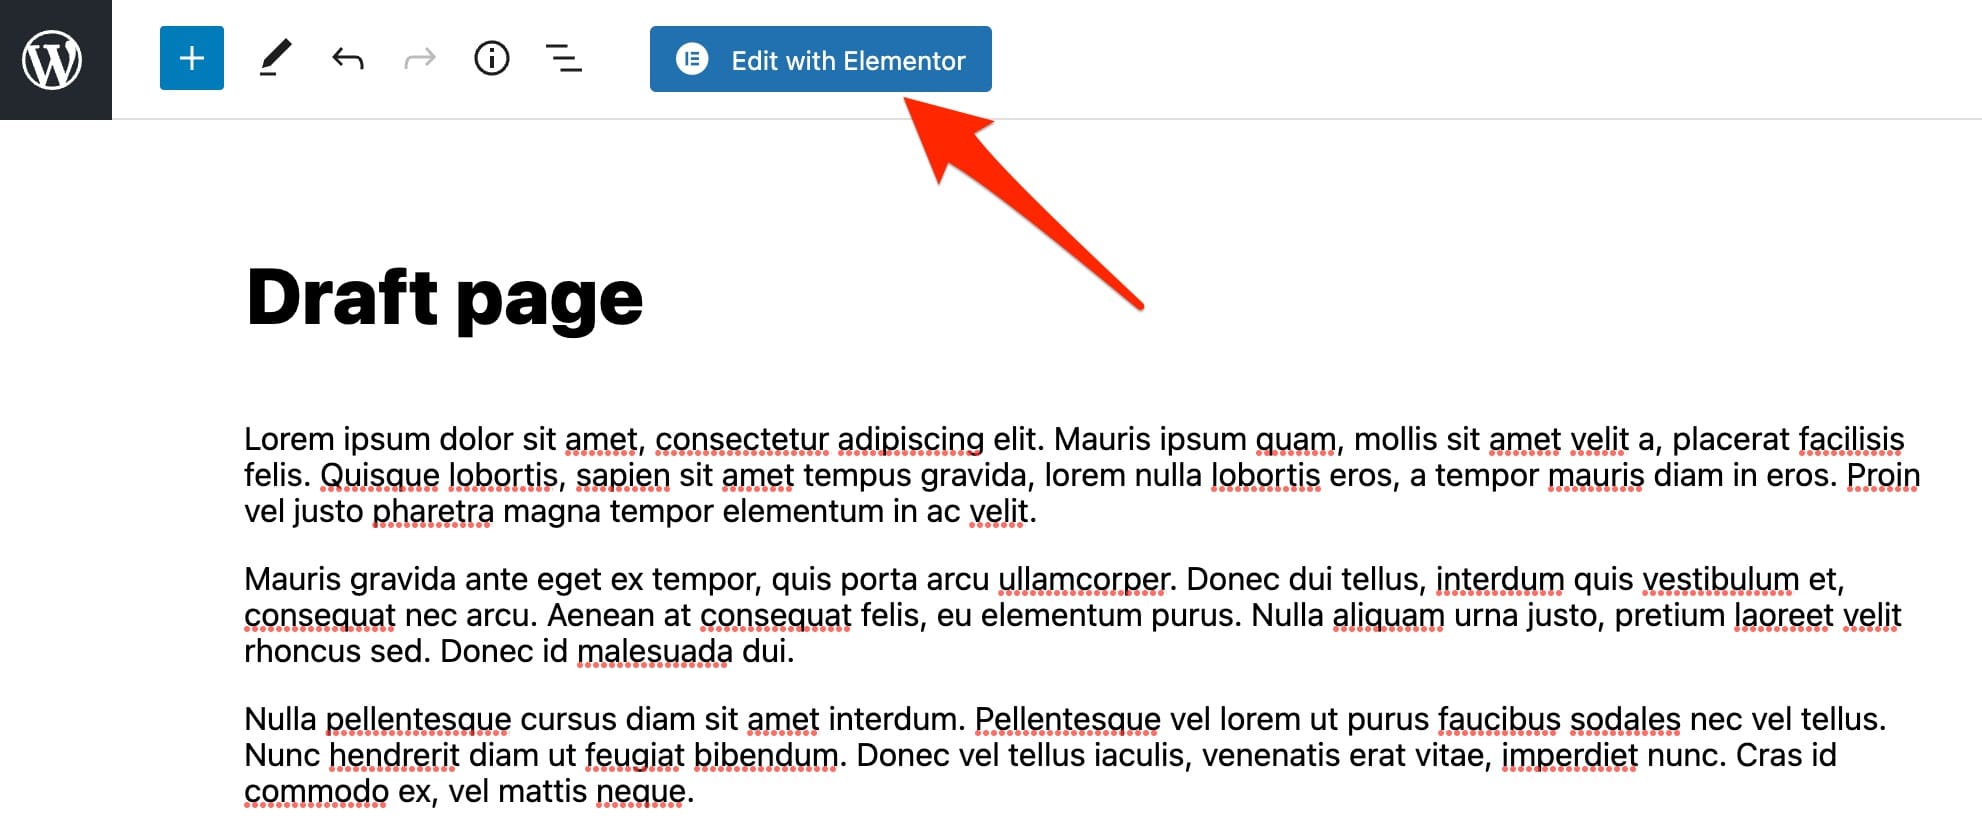 The "Edit with Elementor" button takes you to the page builder interface.